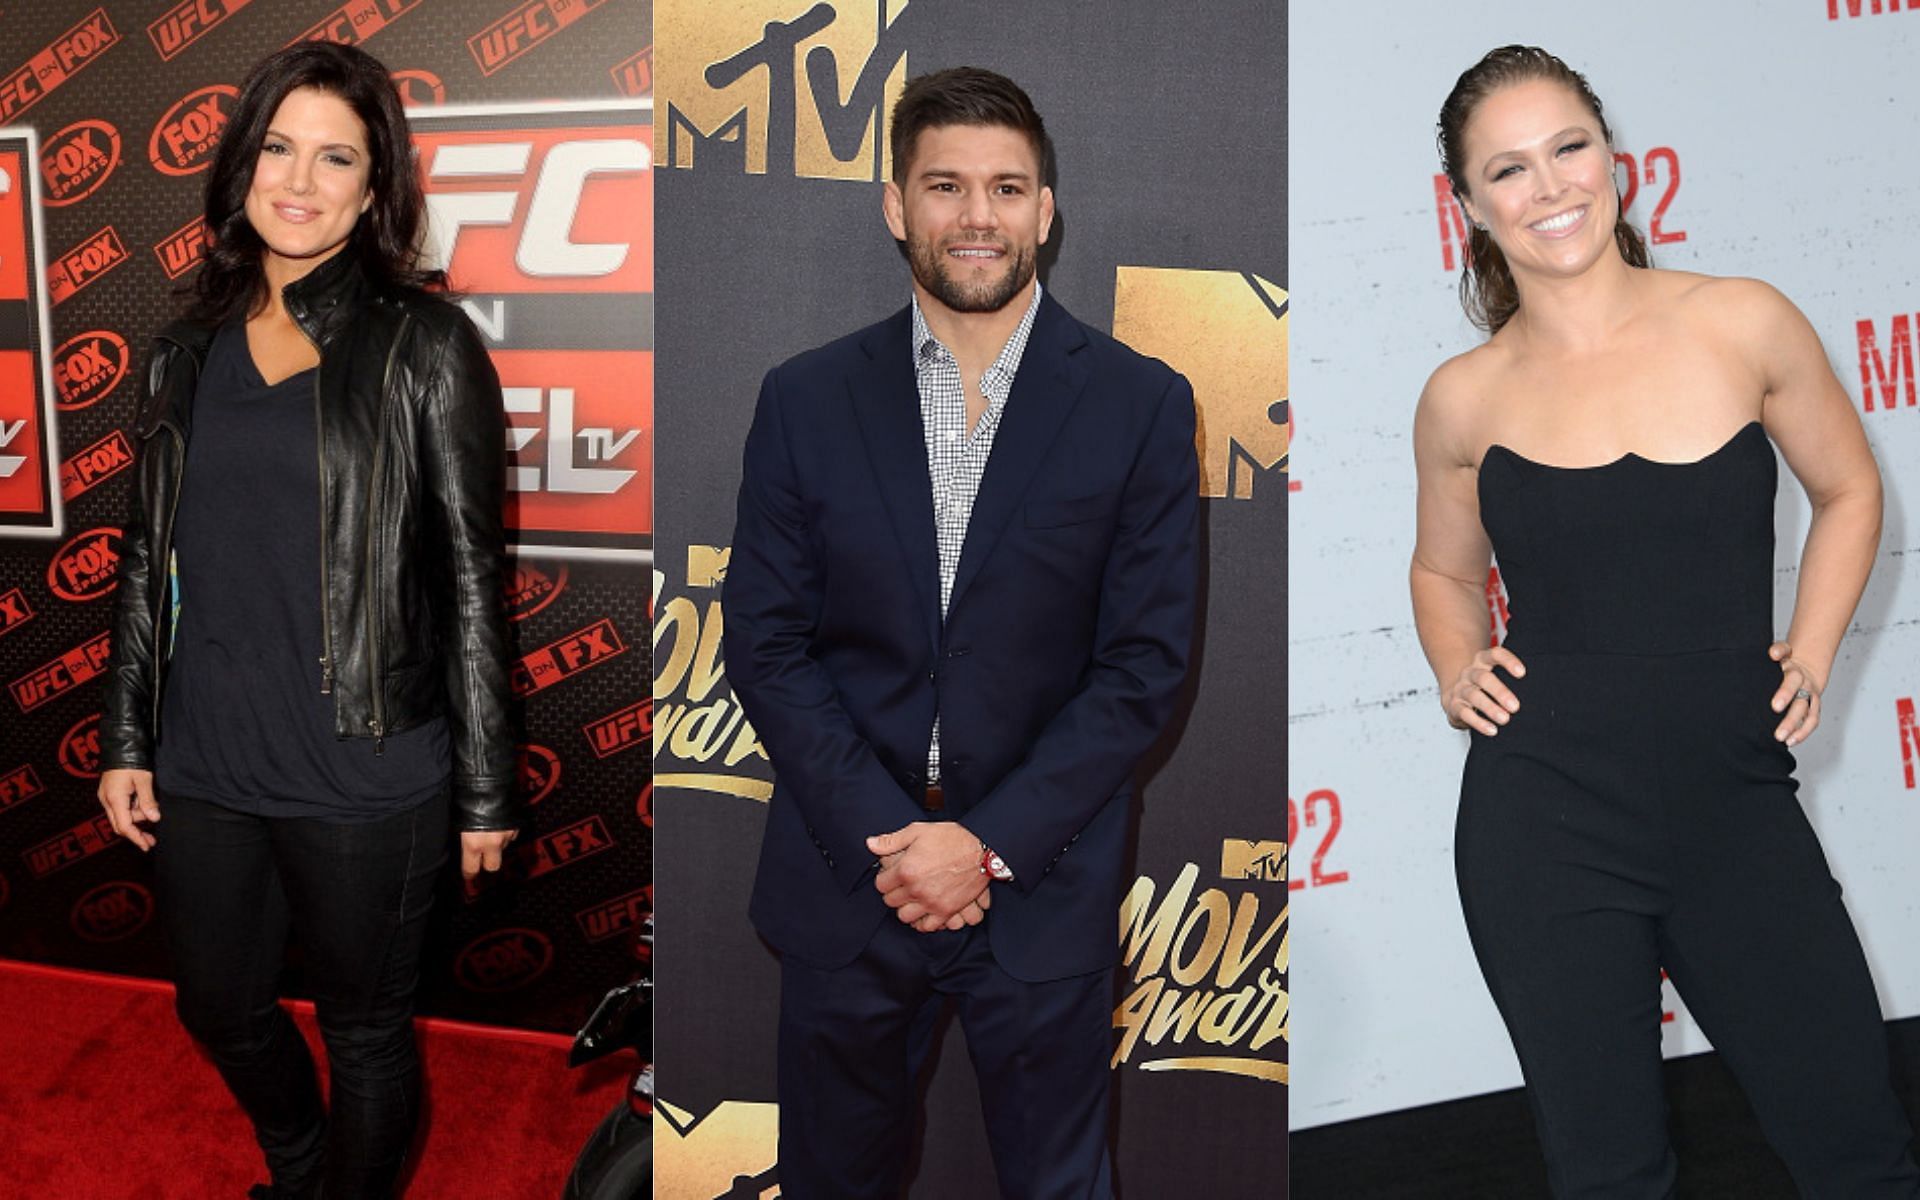 Gina Carano (left), Josh Thomson (middle), and Ronda Rousey (right)(Images via Getty)